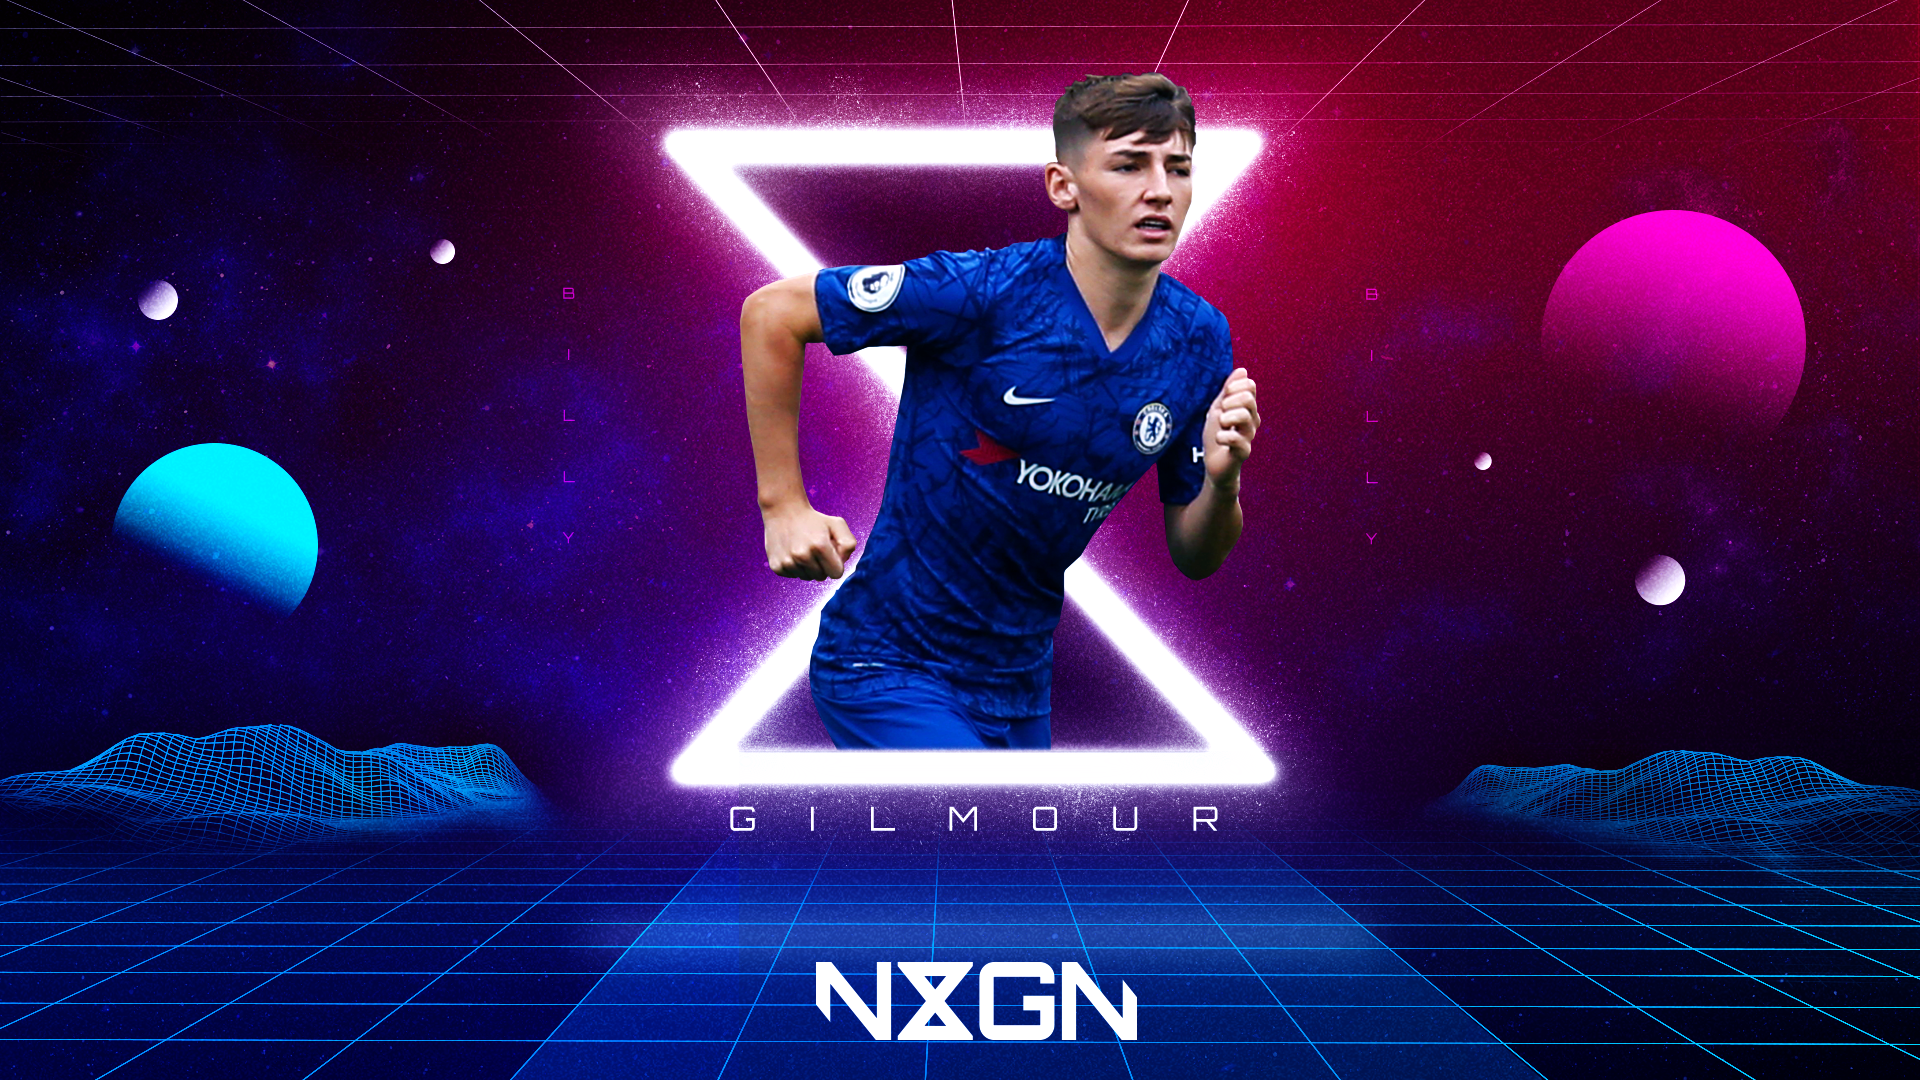 Sports Billy Gilmour HD Wallpaper | Background Image